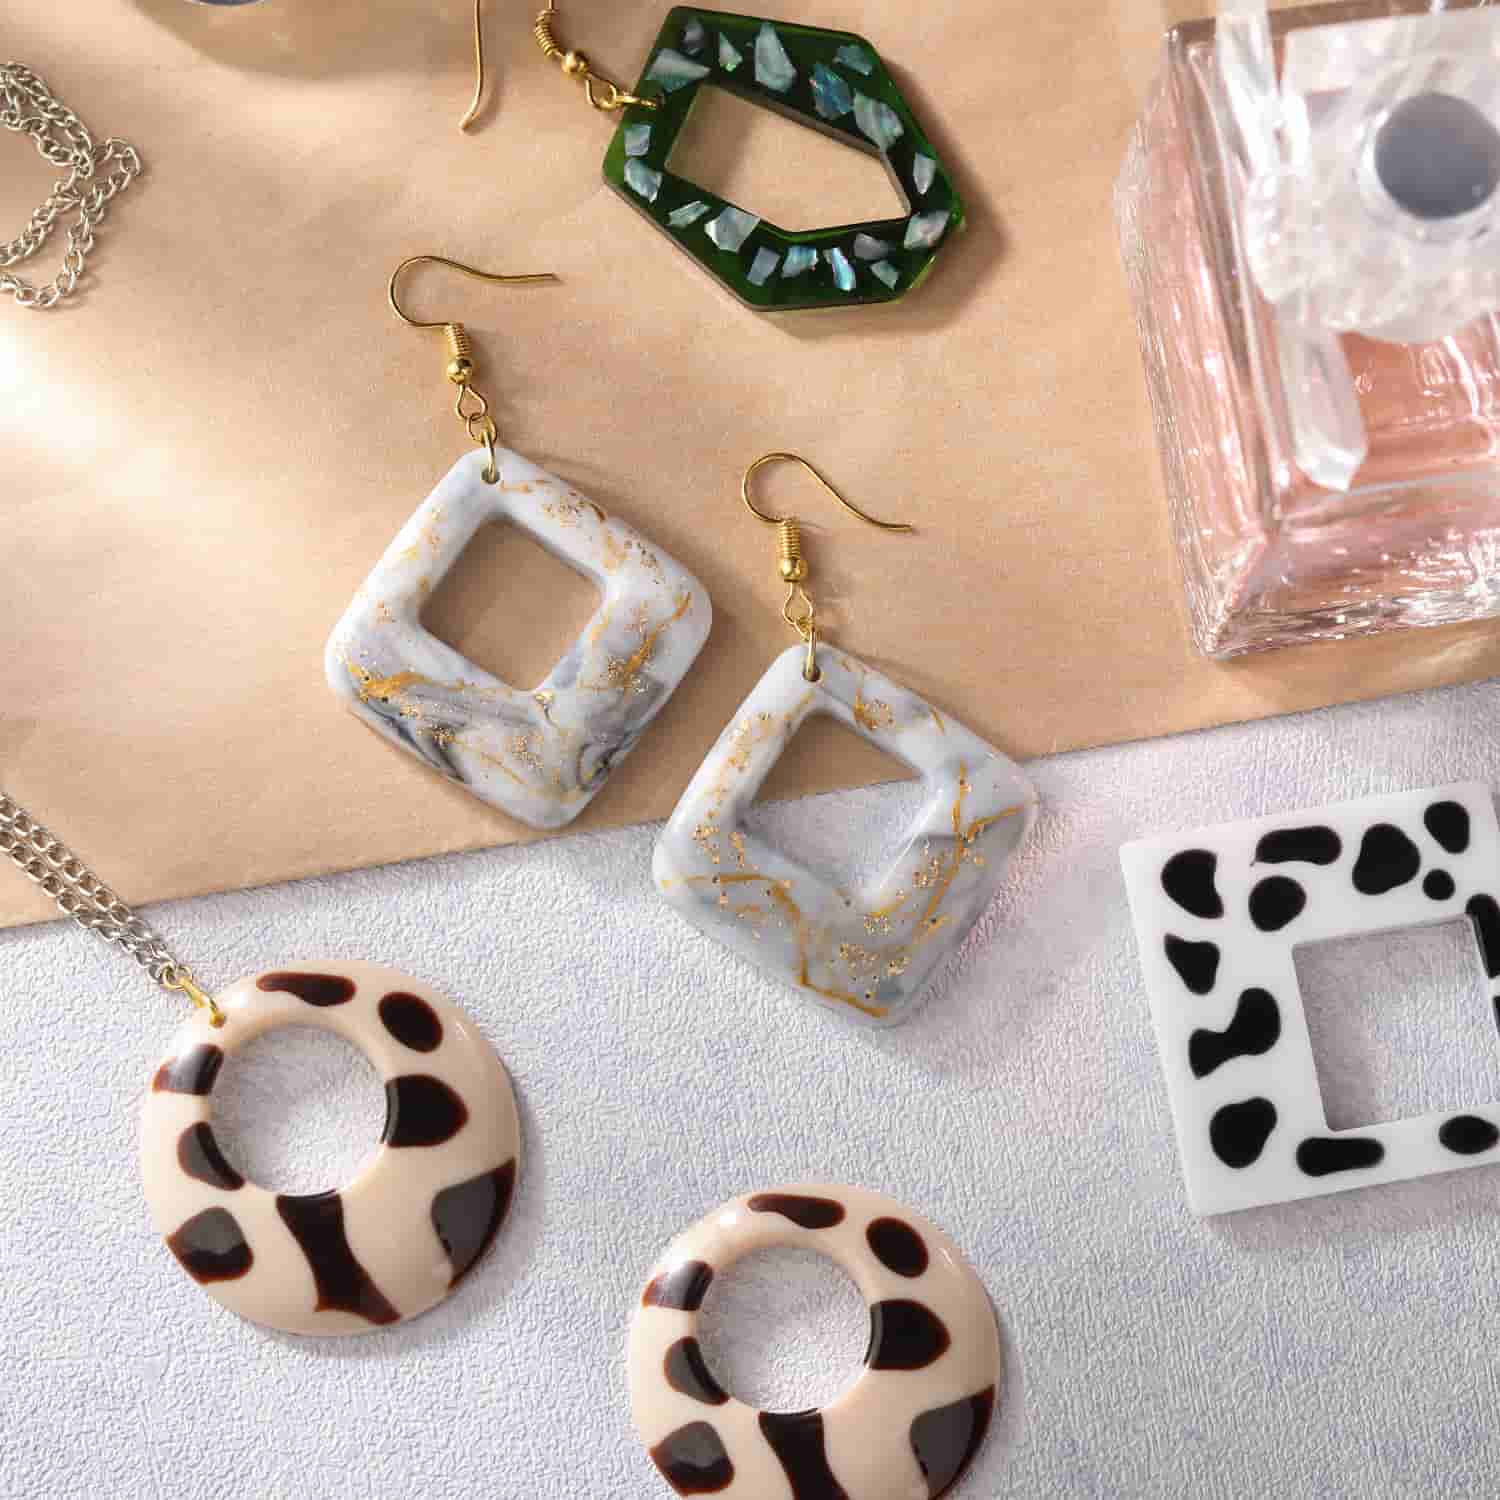 LV Stud Earring Mold | Resin Jewelry Mold